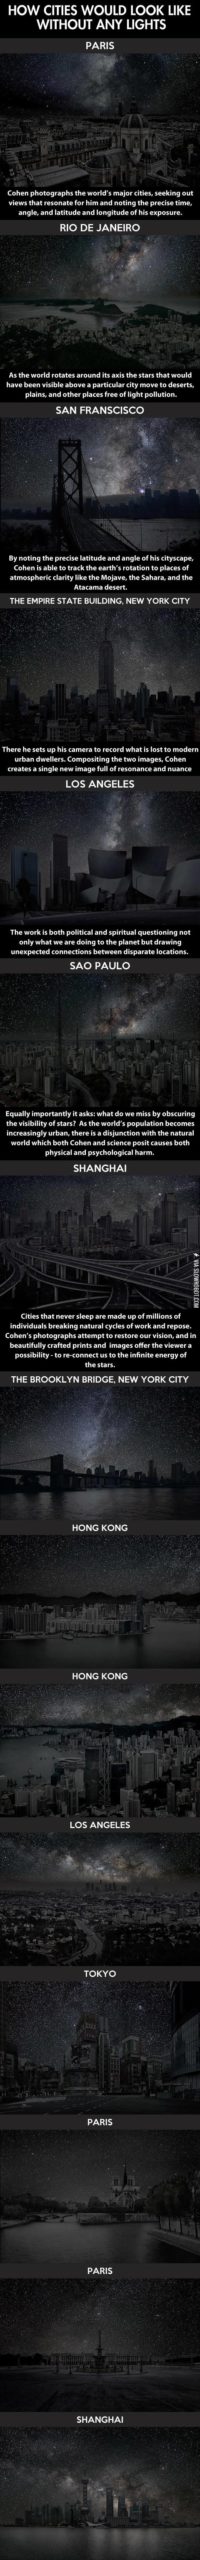 How+cities+would+look+without+any+lights.